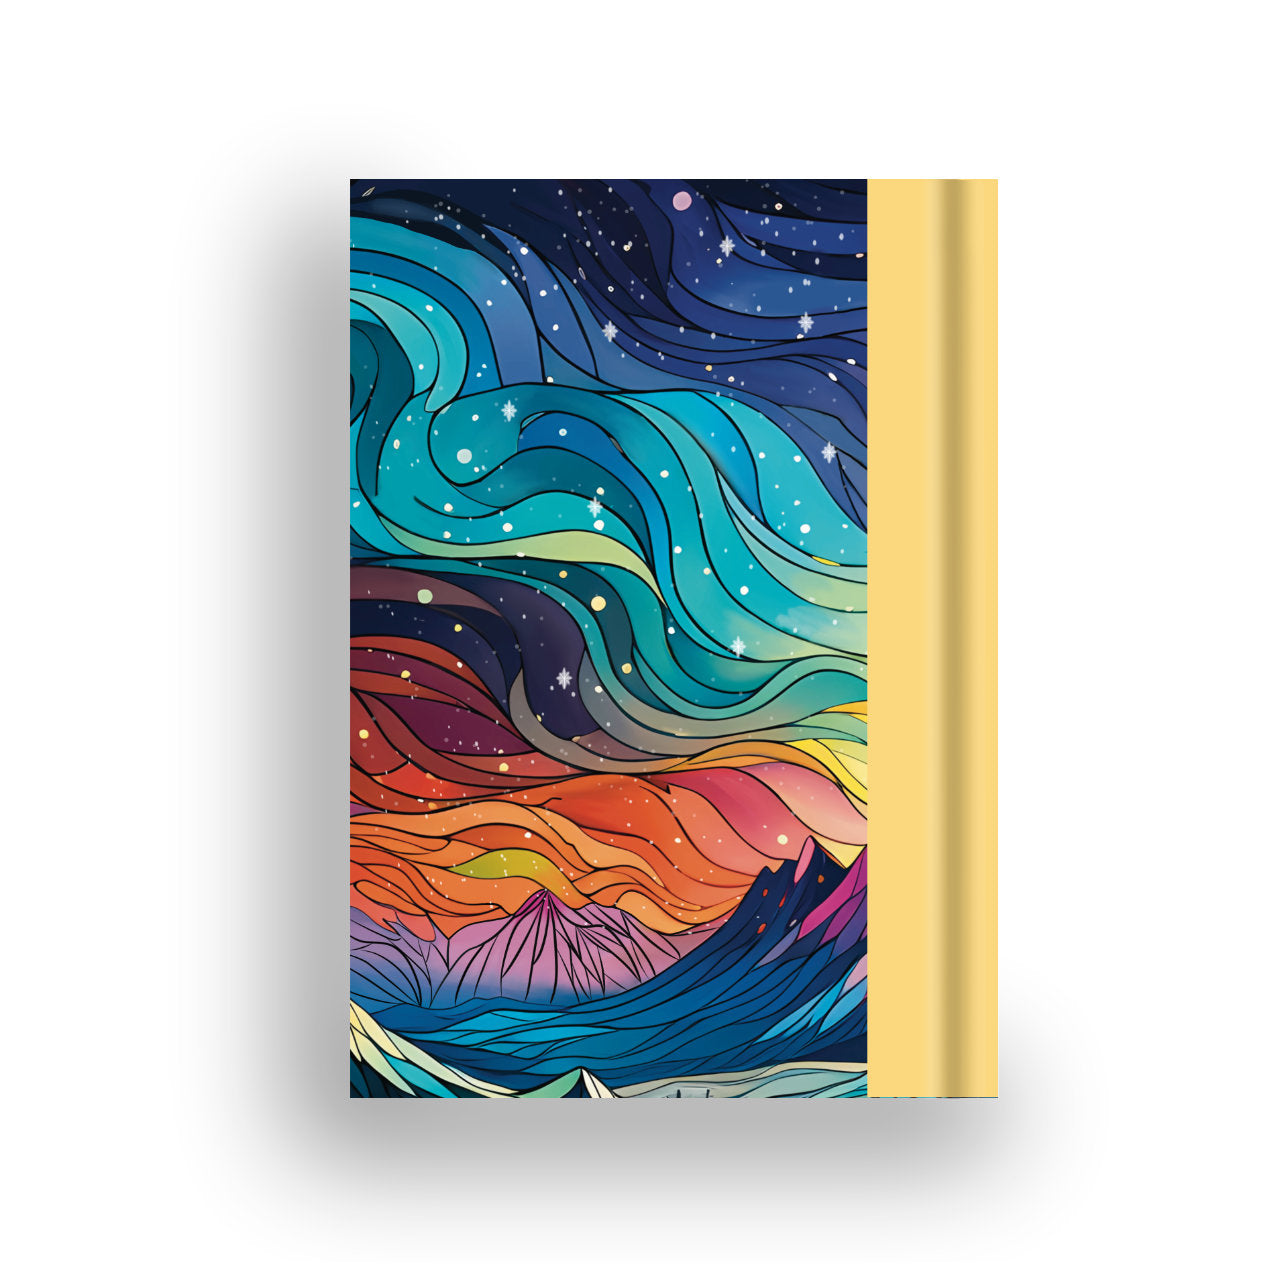 Cosmic Wind notebook back cover with abstract cosmic design